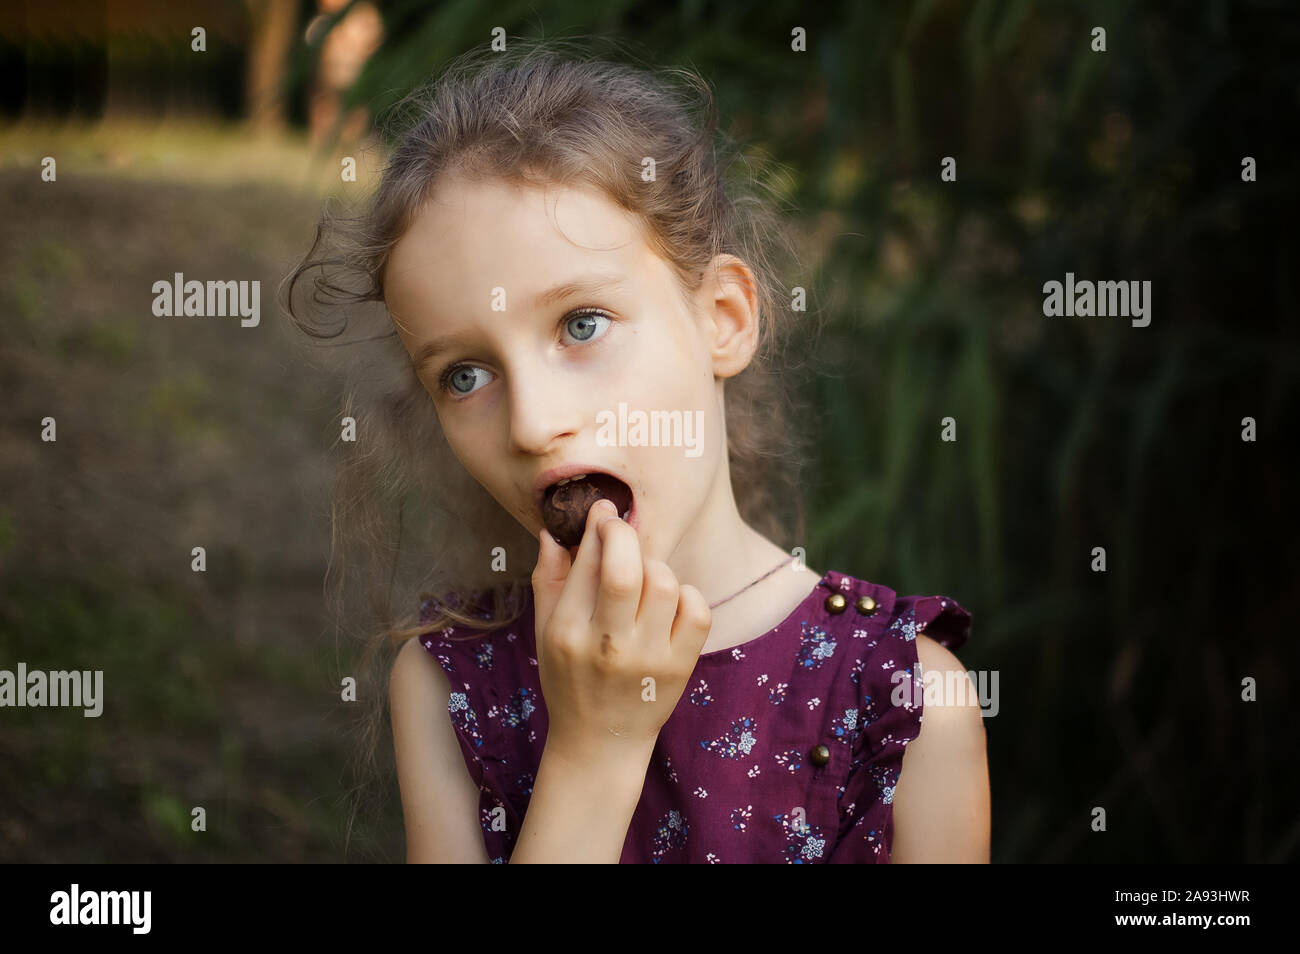 Cute little blond girl with ponytail and violet dress eating a chocolate candy in the park durring a day, unhealthy lifestyle concept Stock Photo